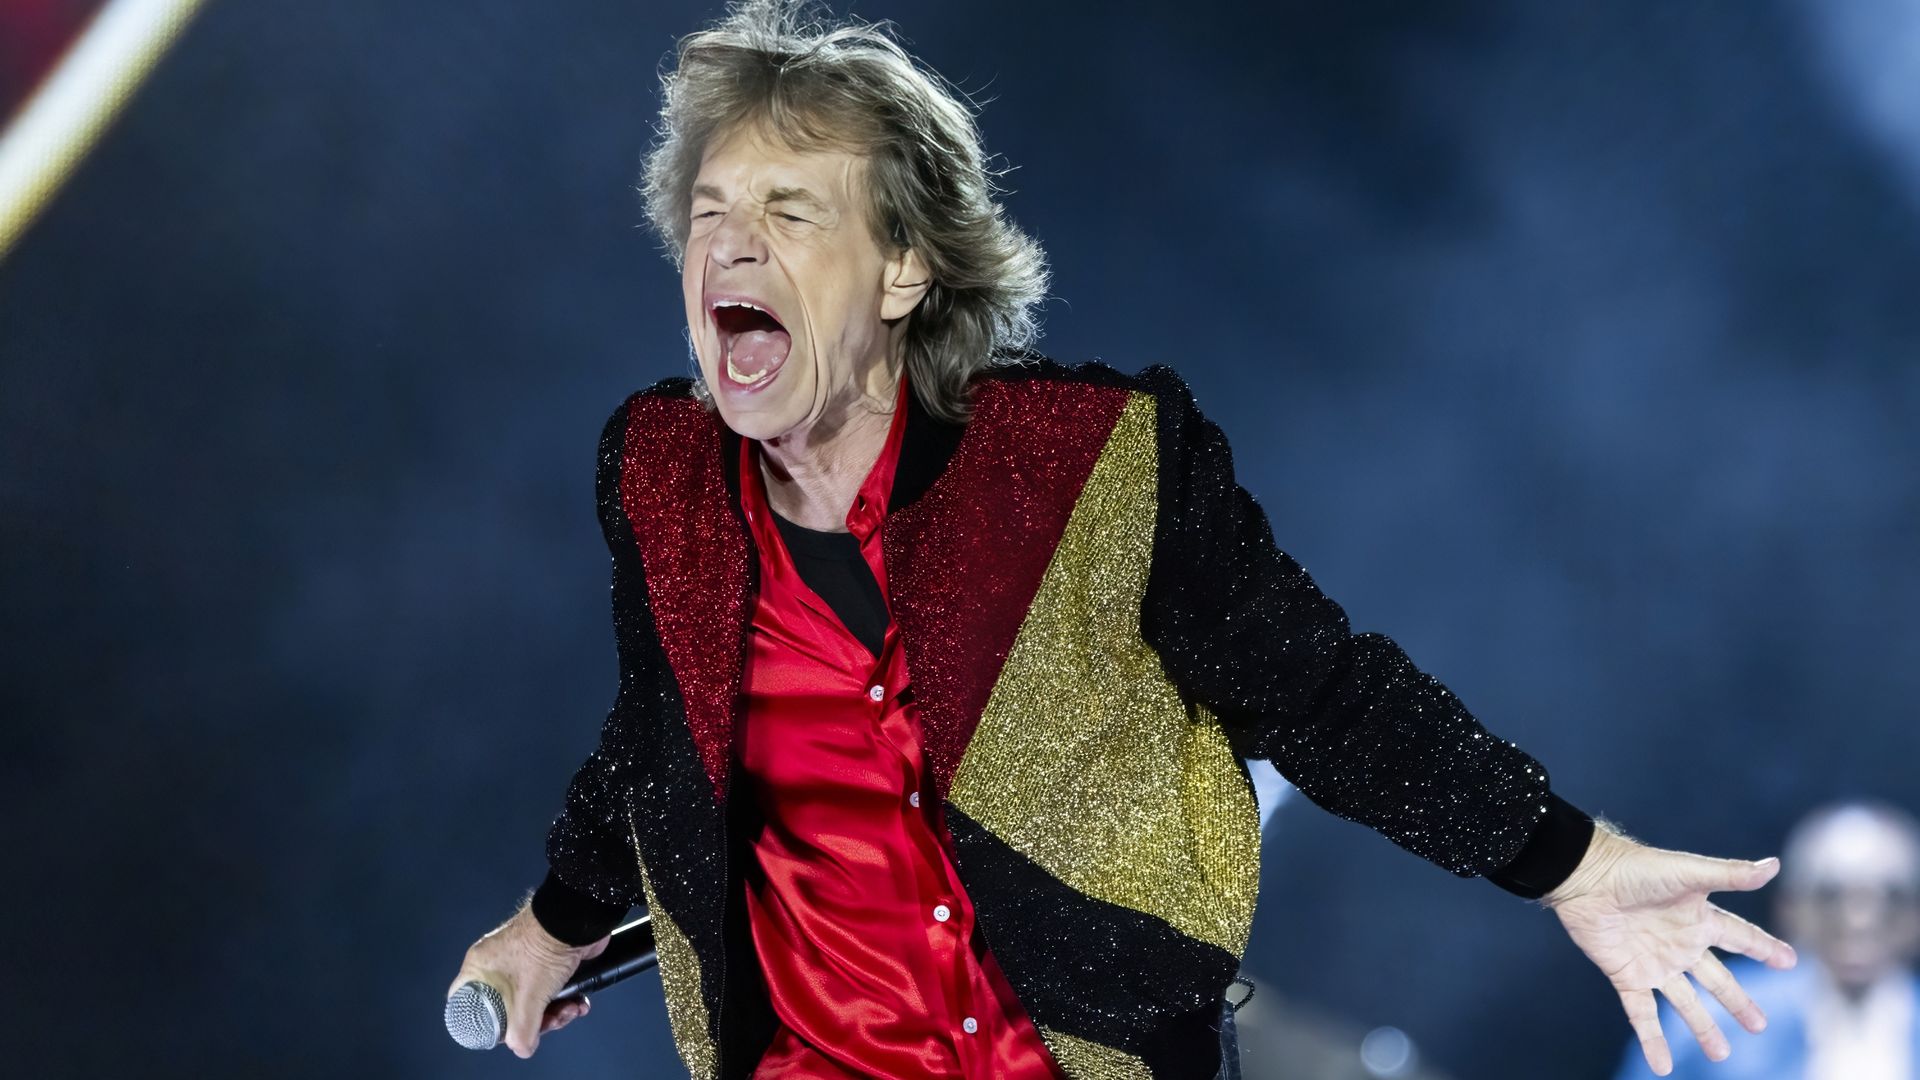 Mick Jagger shouts on stage. 